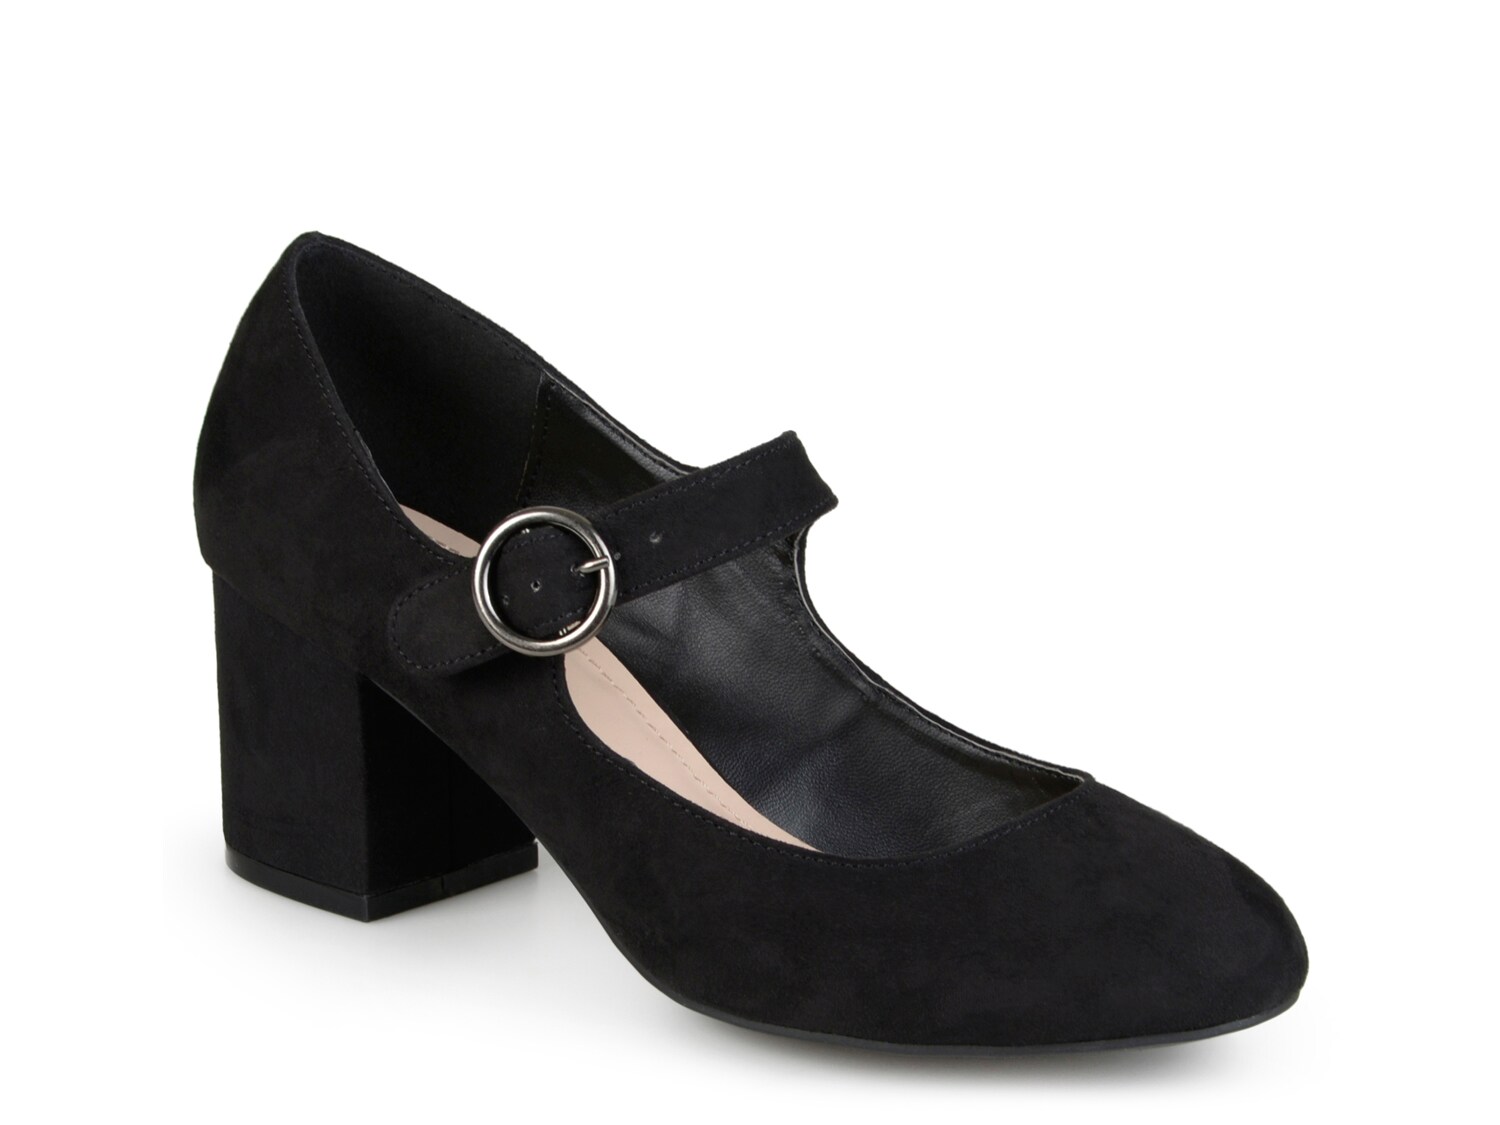 Journee Collection Harlo Pump - Free Shipping | DSW